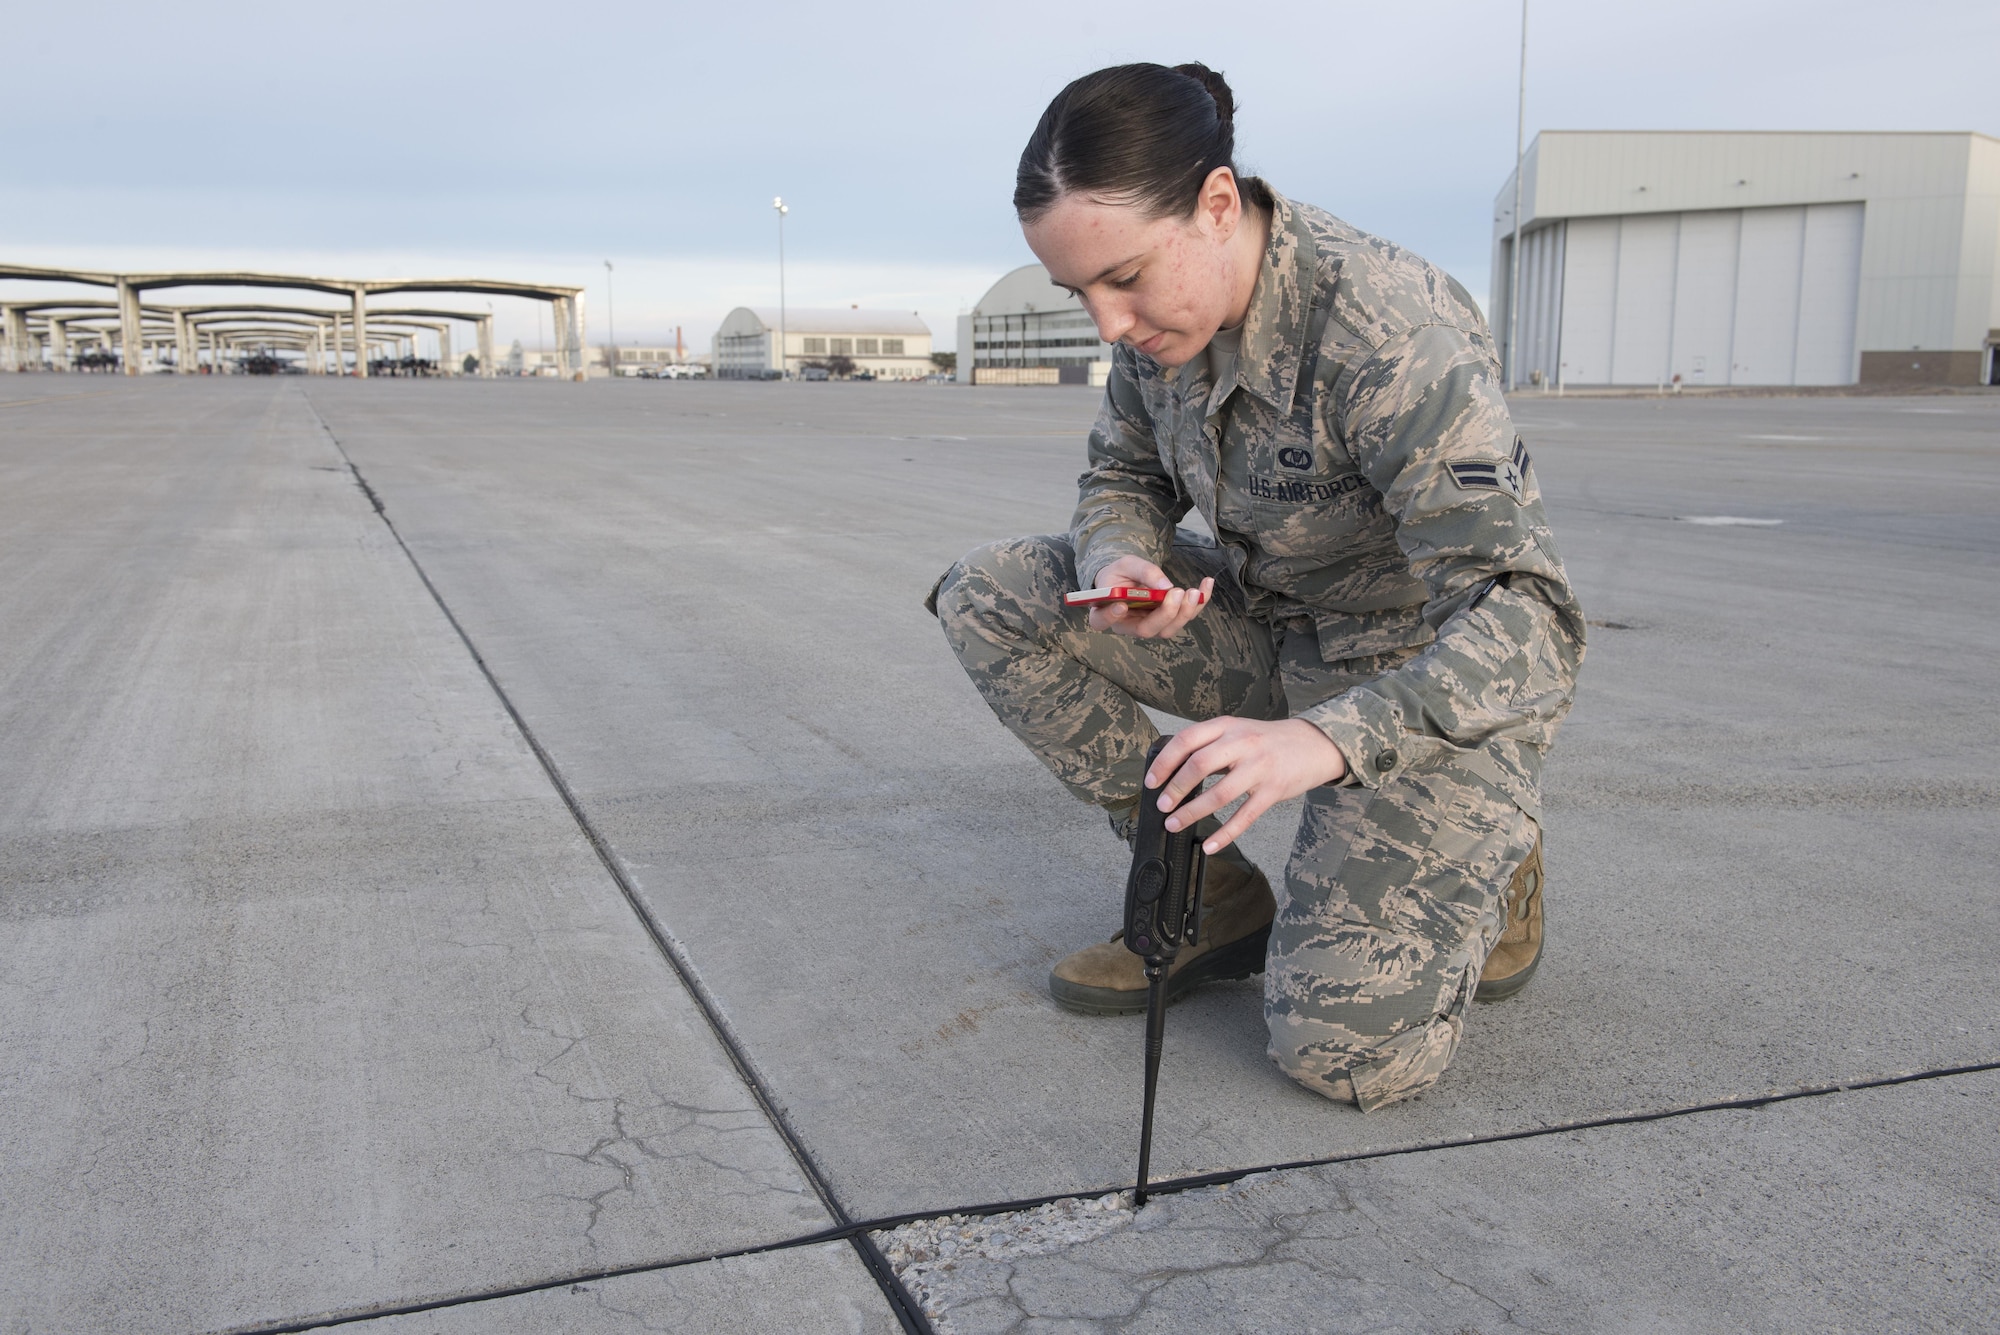 Airman 1st Class Sabrina Watson, 366th Operations Support Squadron airfield management coordinator takes a photograph of a crack in the runway Nov. 30, 2017, at Mountain Home Air Force Base, Idaho. Once completing checks for cracks or debris on the runway the information is tracked in a log and submitted to the 366th Civil Engineer Squadron to be fixed. (U.S. Air Force photo by Senior Airman Lauren-Taylor Levin)